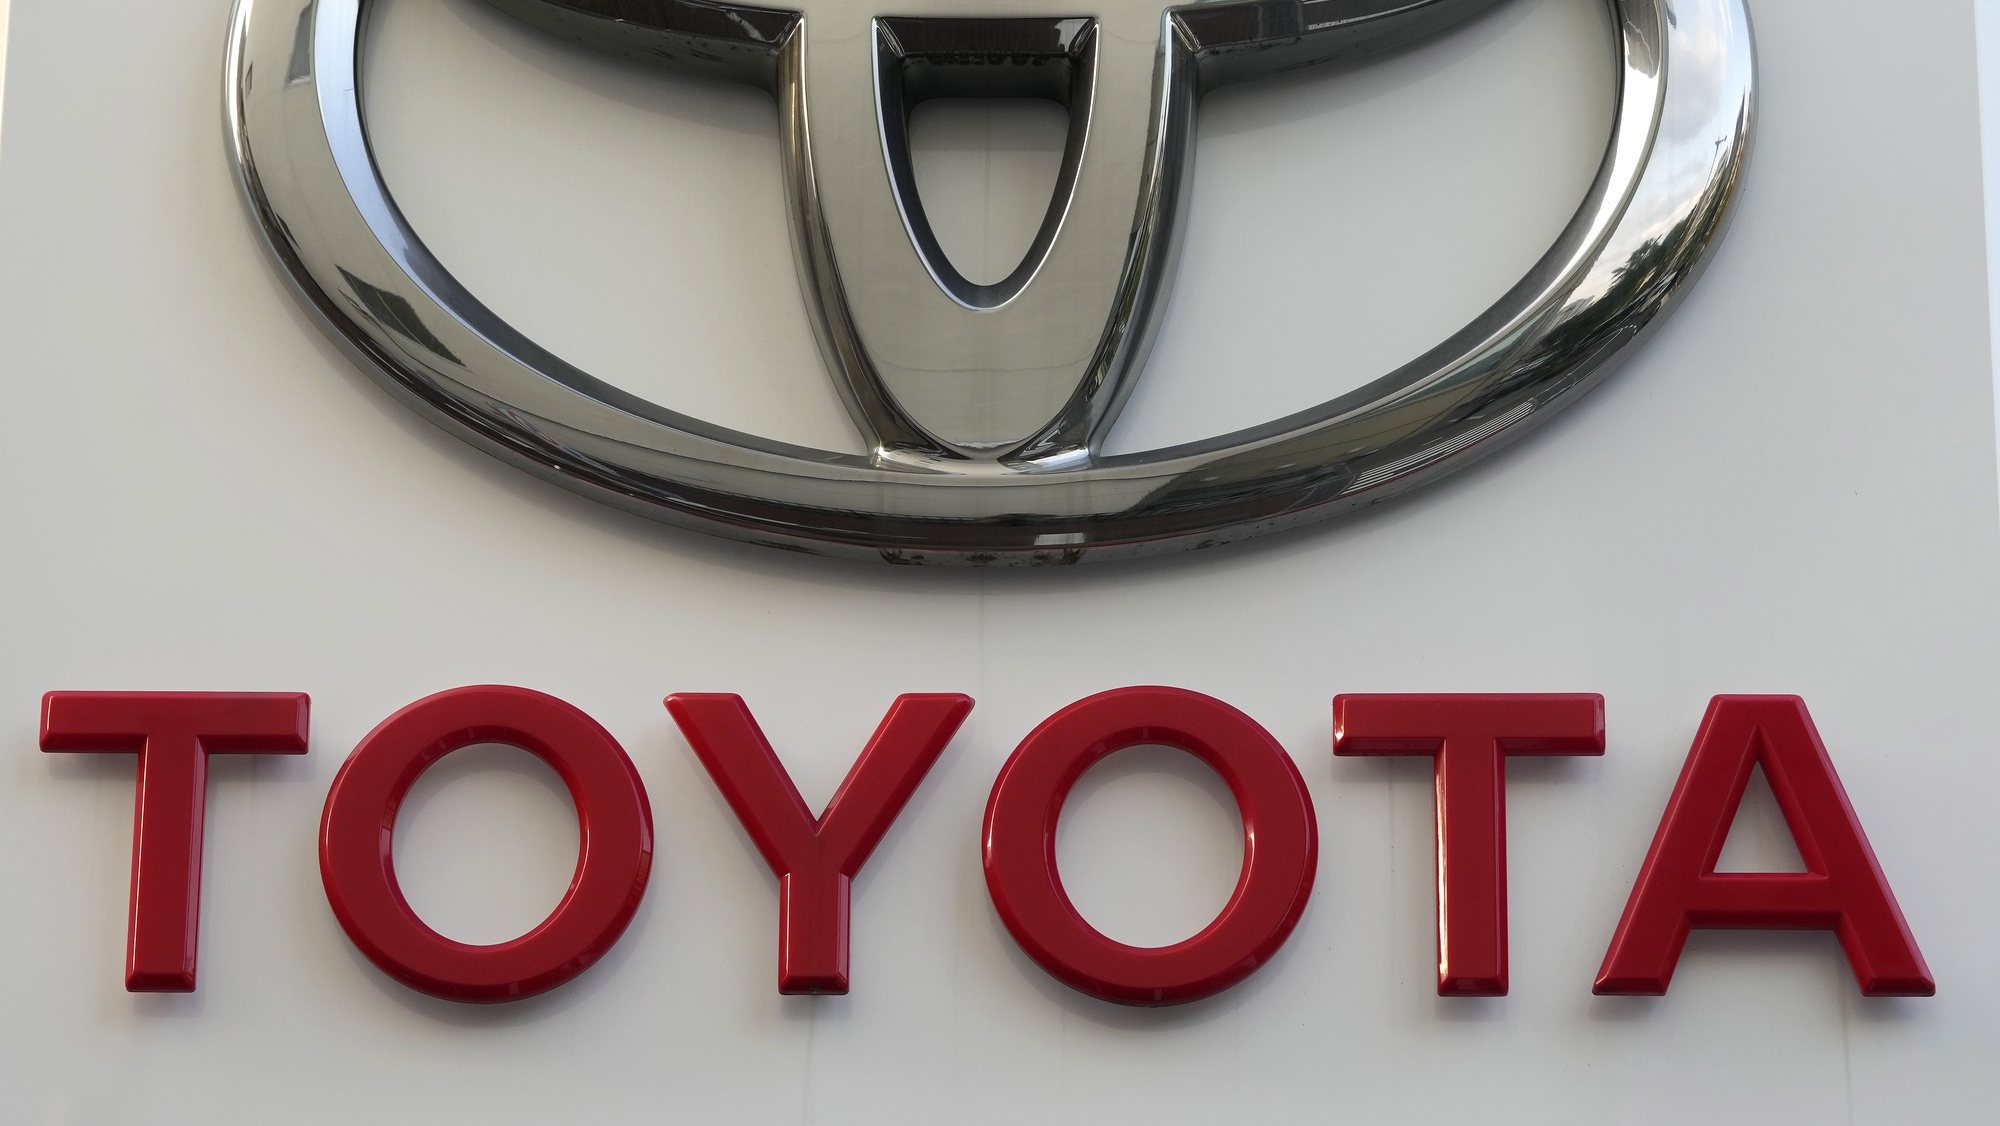 epa09939576 The logo of Toyota Motor Corp. is displayed at a Toyota Motor dealer in Tokyo, Japan, 11 May 2022. Toyota Motor Corp. posted its financial result for the year 2021 ending in March 2022, with an increase of more than 36 percent up to three trillion yen (about 23 billion US dollar), as well as arecord high net profit of 2.85 trillion yen, up 26.9 percent year-on-year.  EPA/KIMIMASA MAYAMA